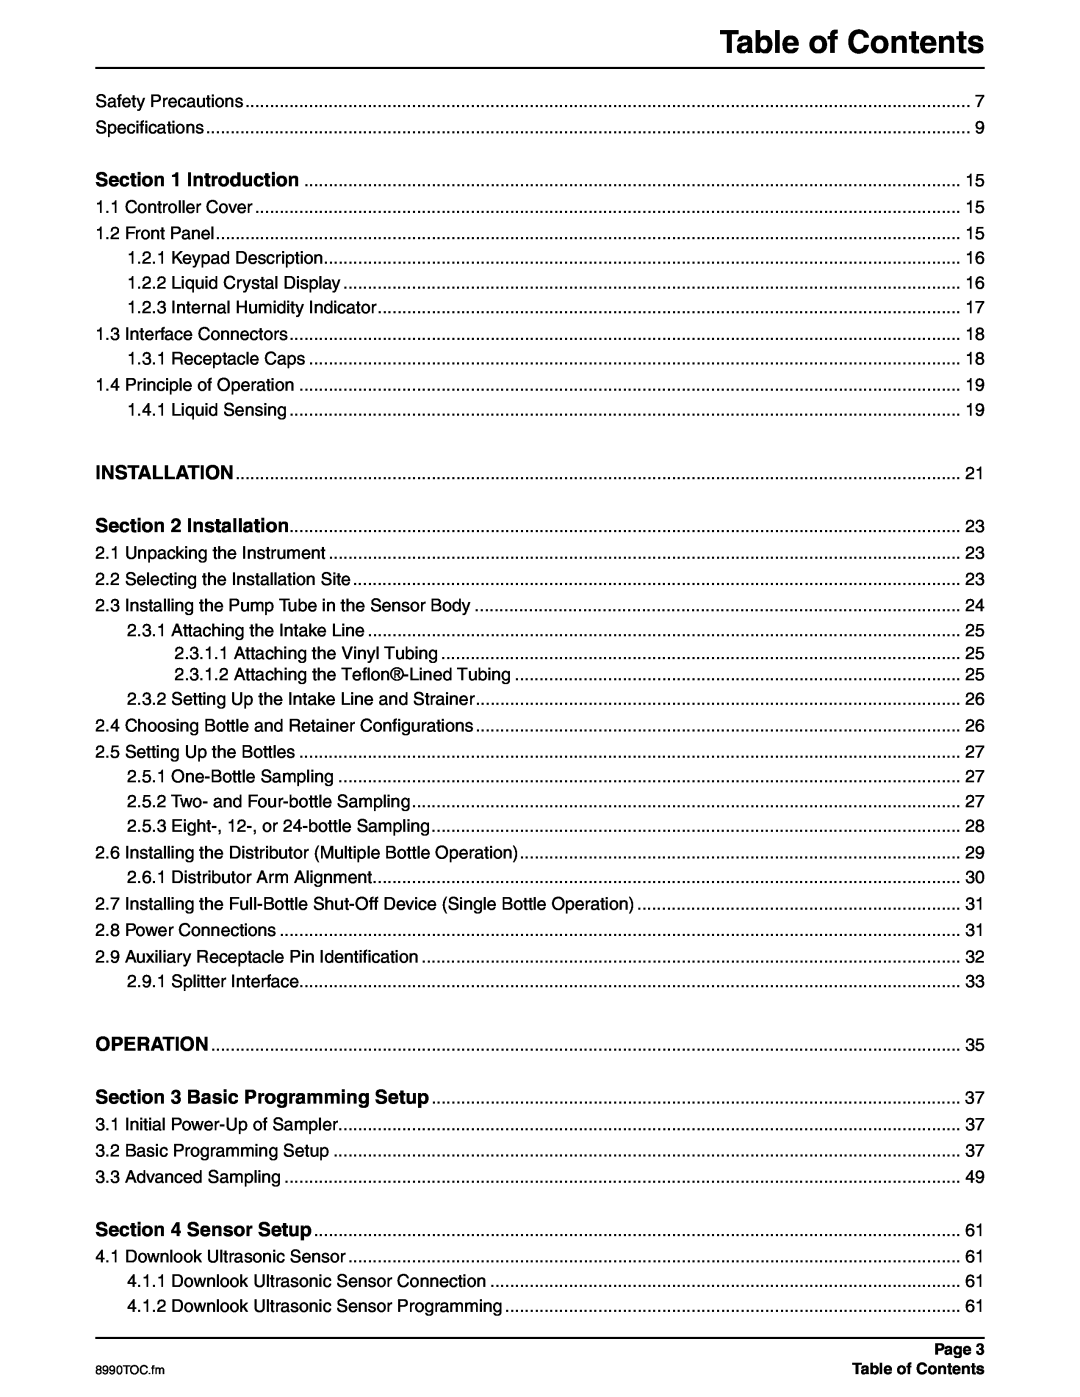 Hach 900 MAX manual Table of Contents, Page 